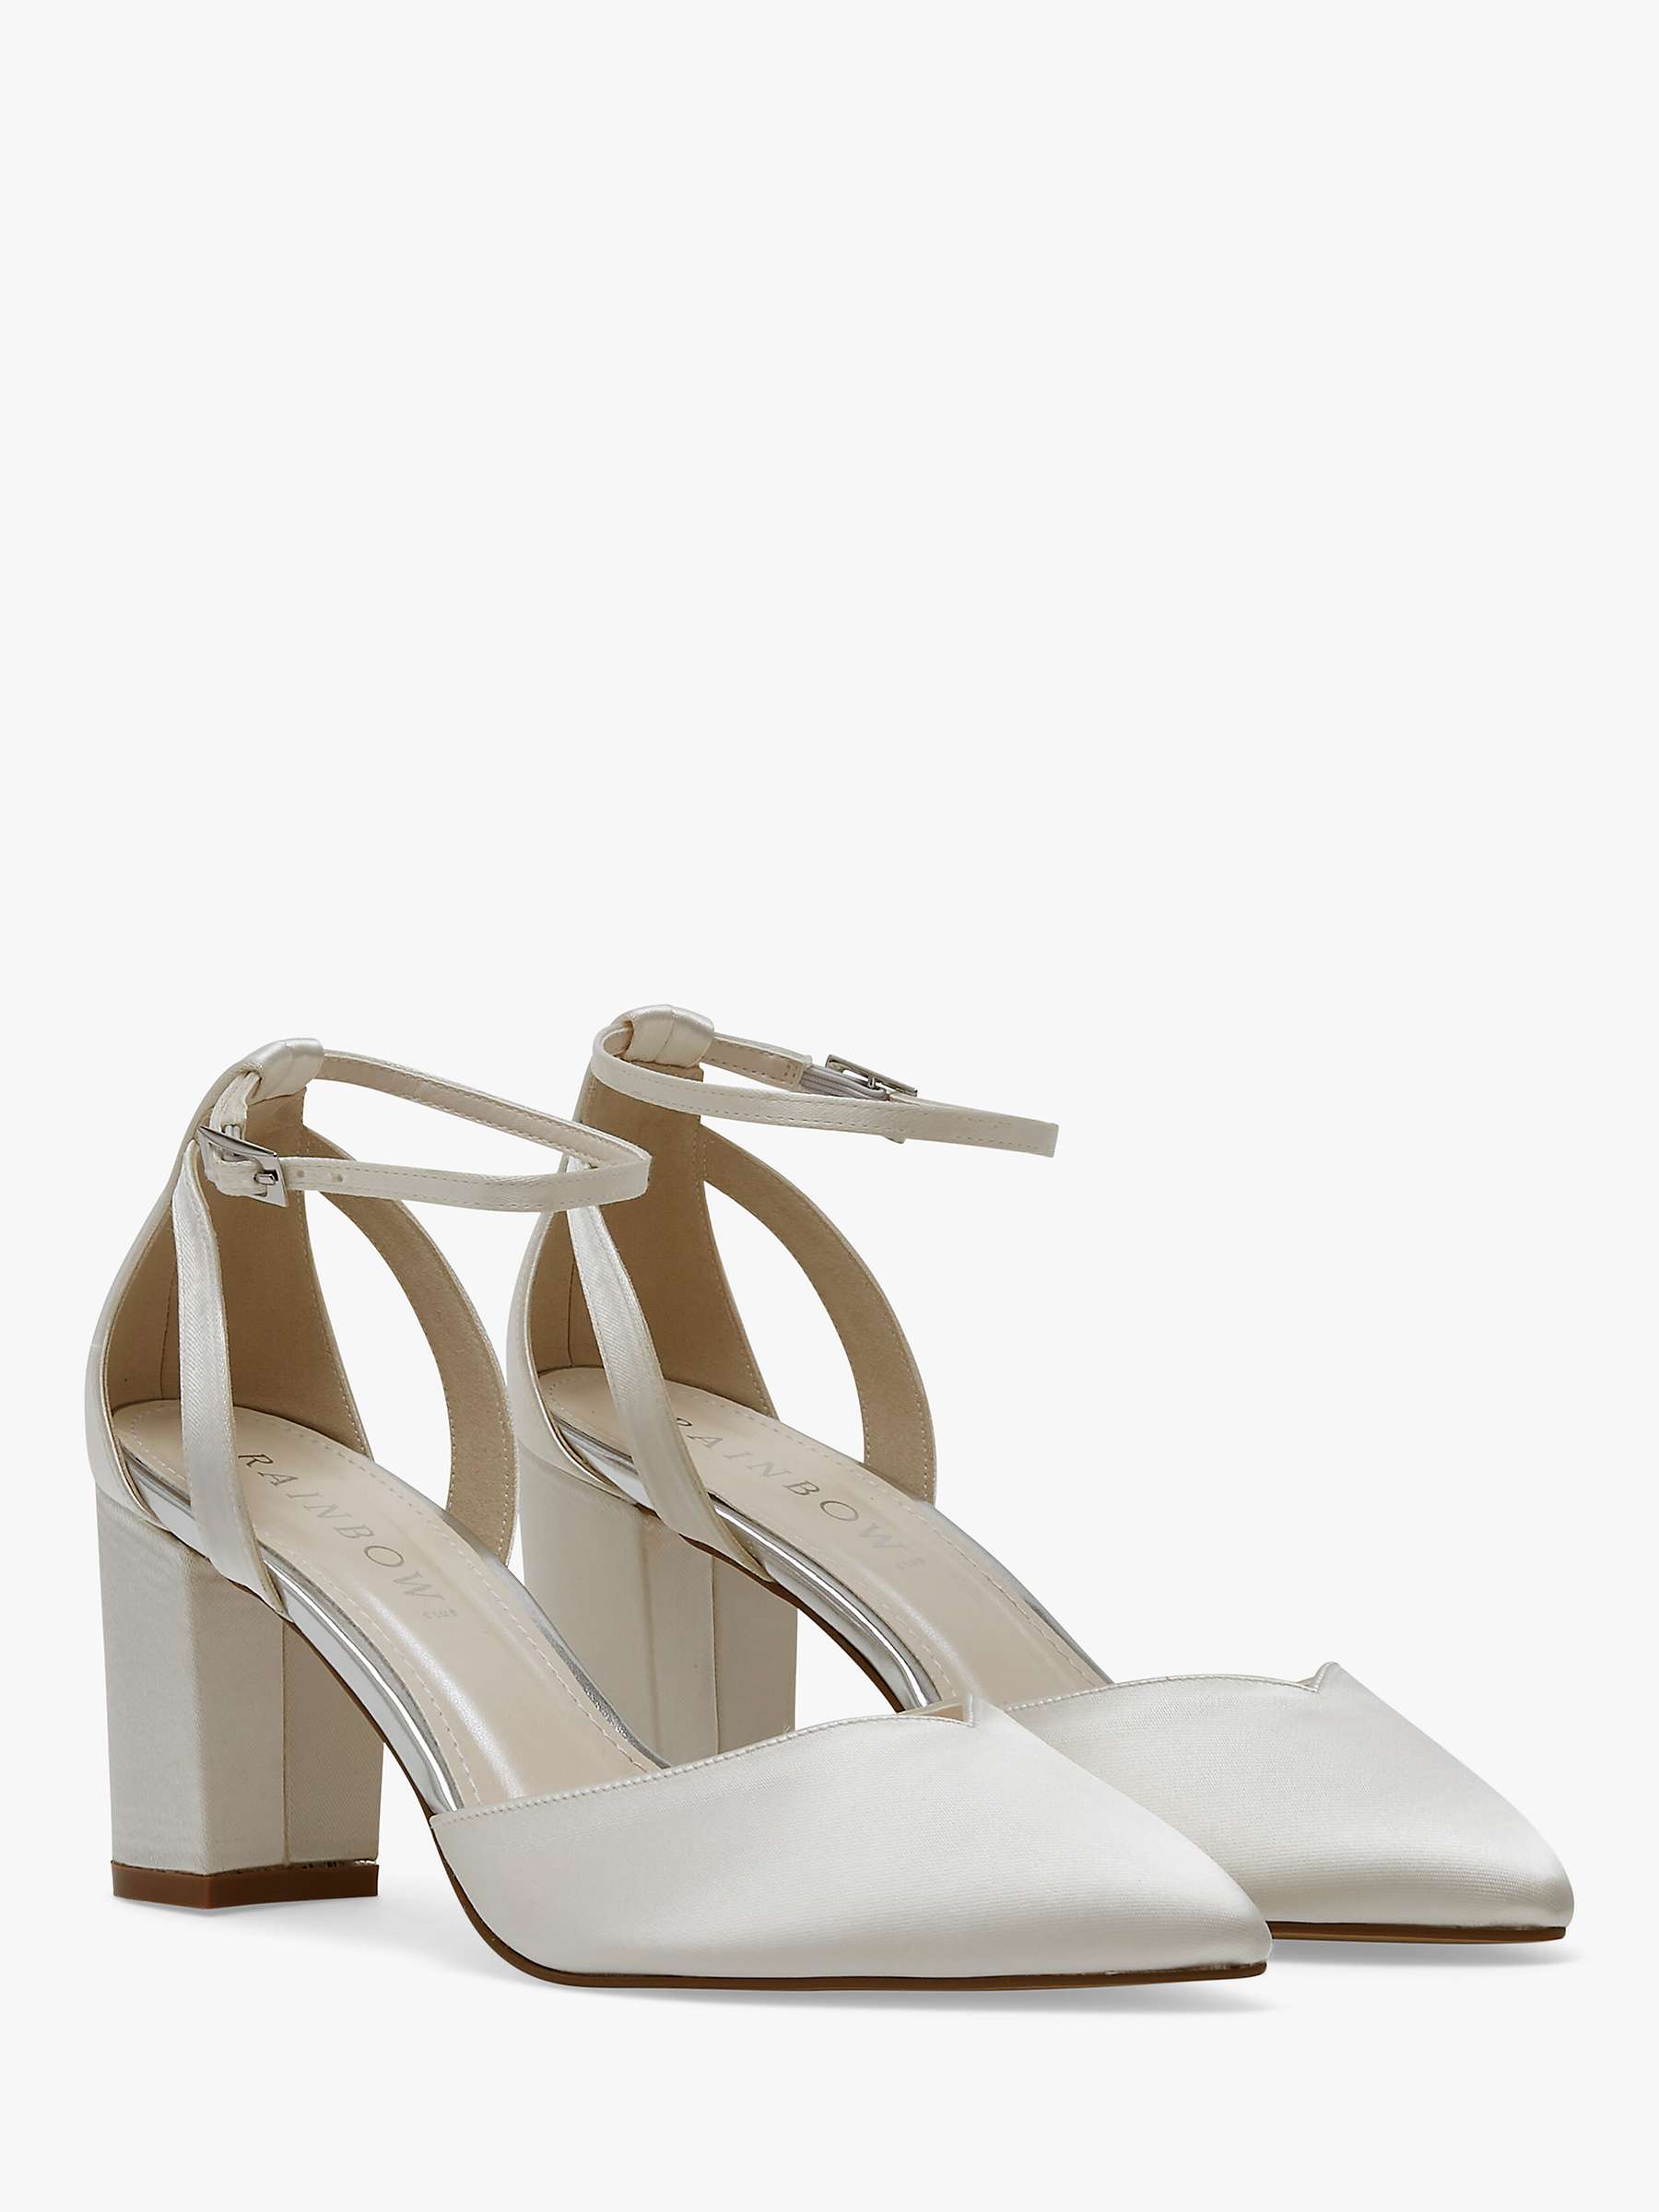 Buy Rainbow Club Bella Wide Fit Wedding Shoes, Ivory Satin Online at johnlewis.com